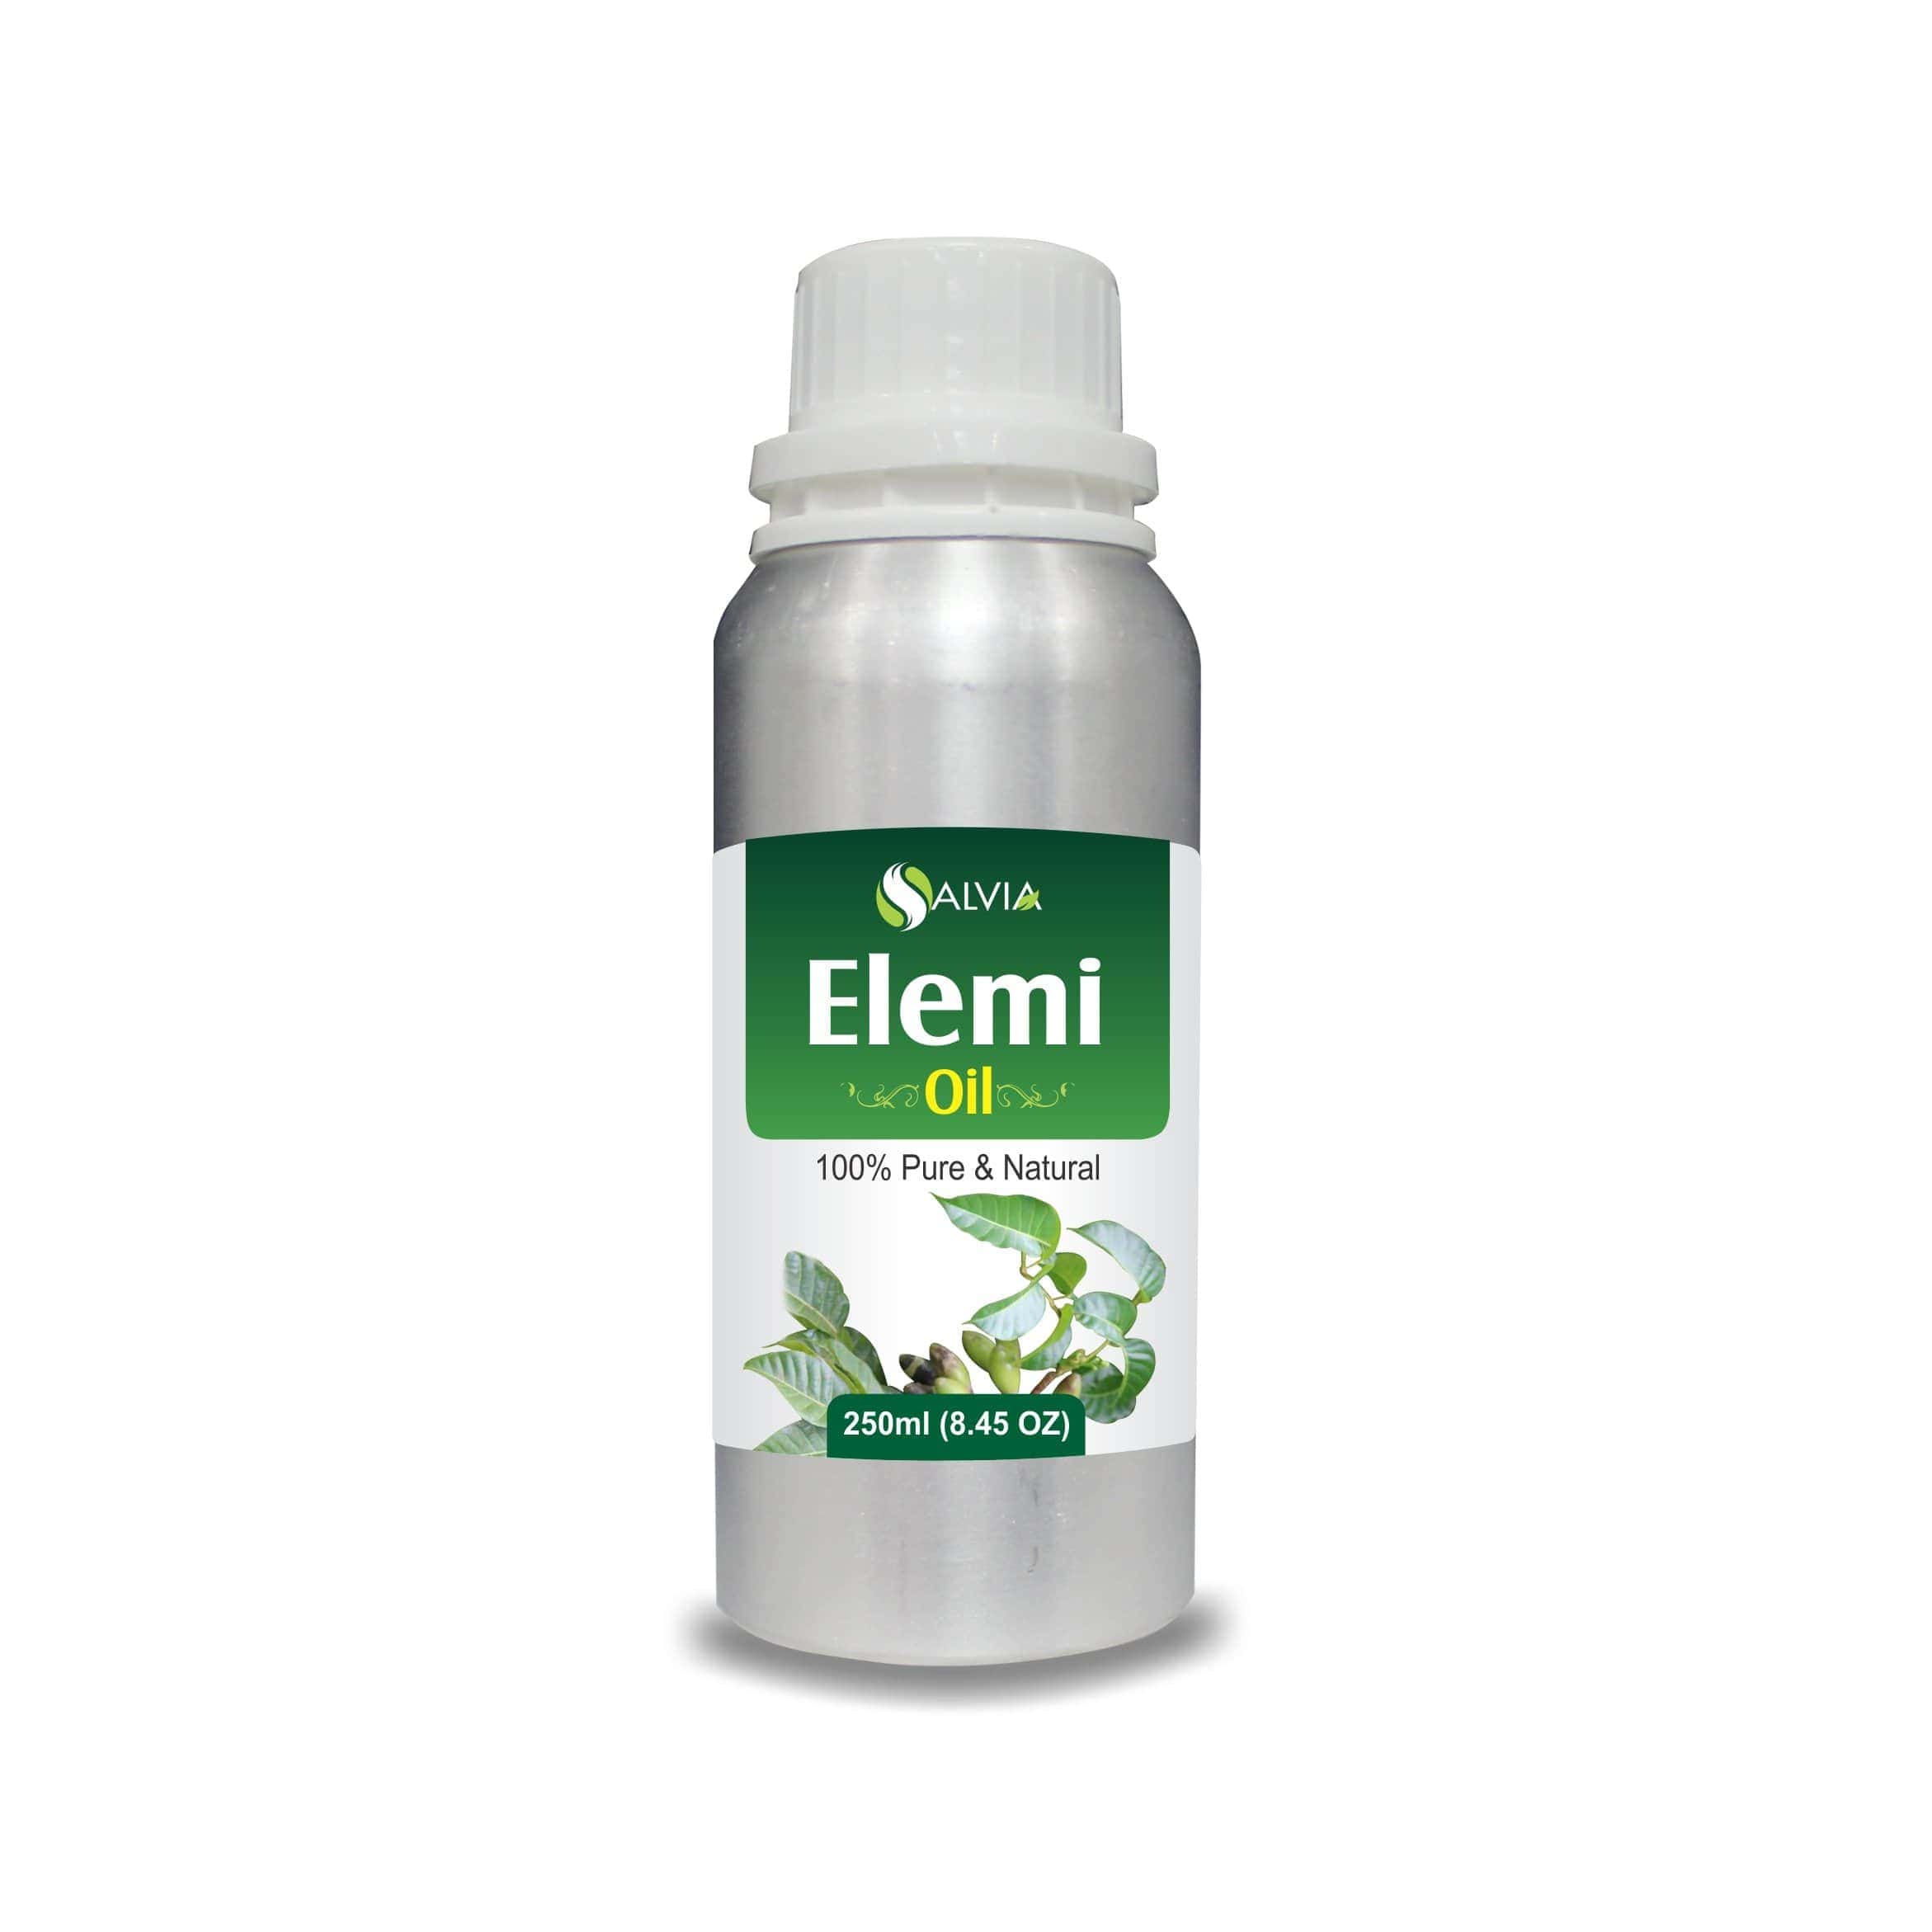 elemi essential oil uses and benefits